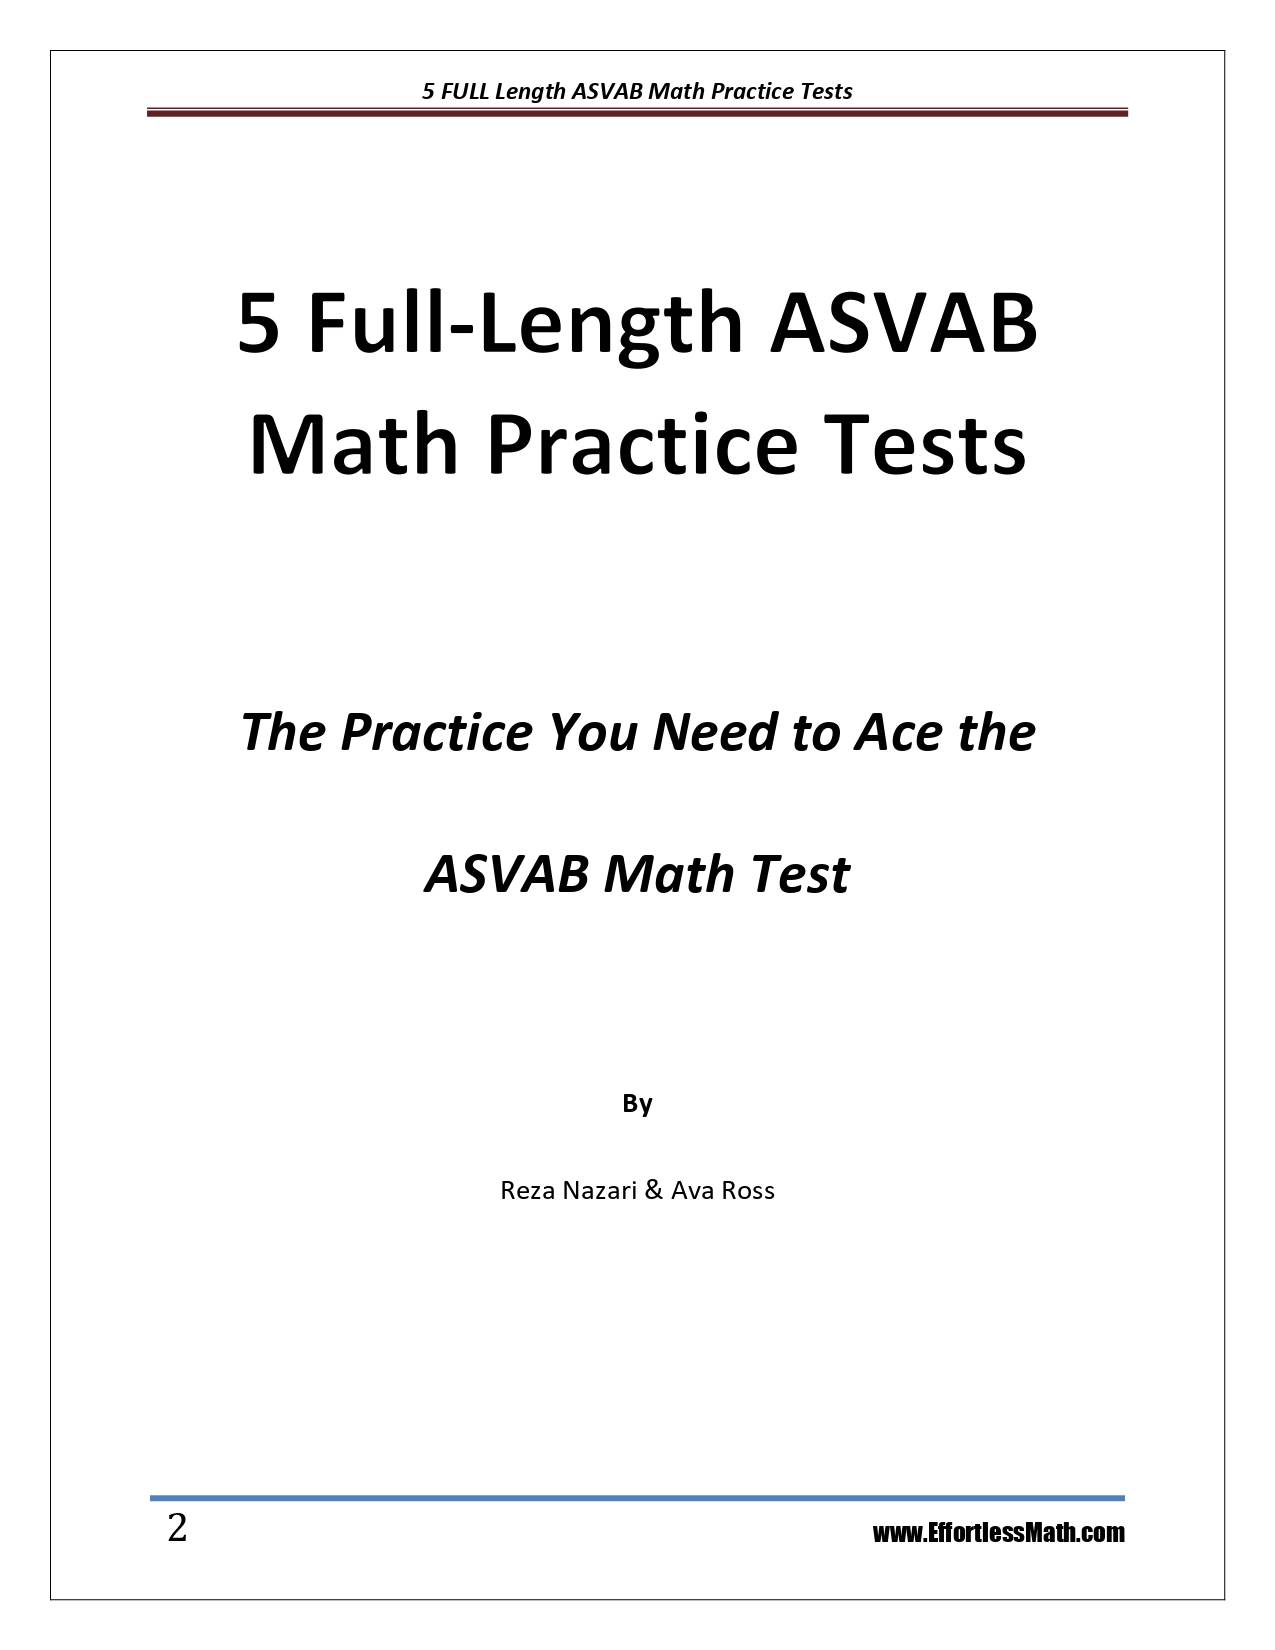 5-full-length-asvab-math-practice-tests-the-practice-you-need-to-ace-the-asvab-math-test